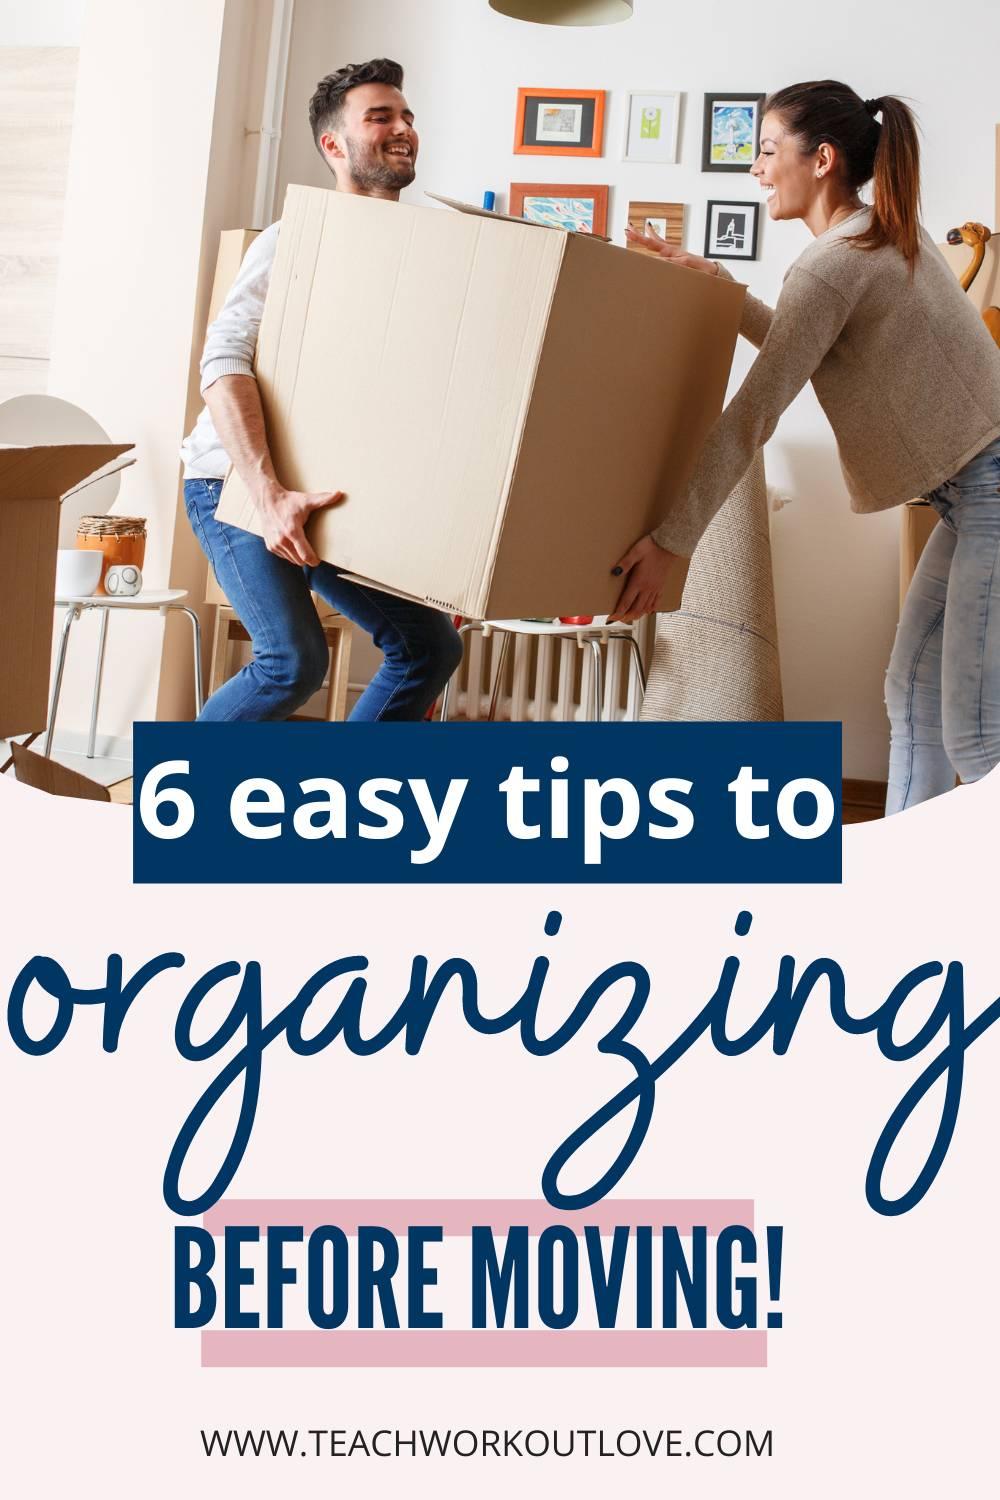 When you’re moving home, there’s lots on your to-do list. Start getting organized today with the help of these six tips.